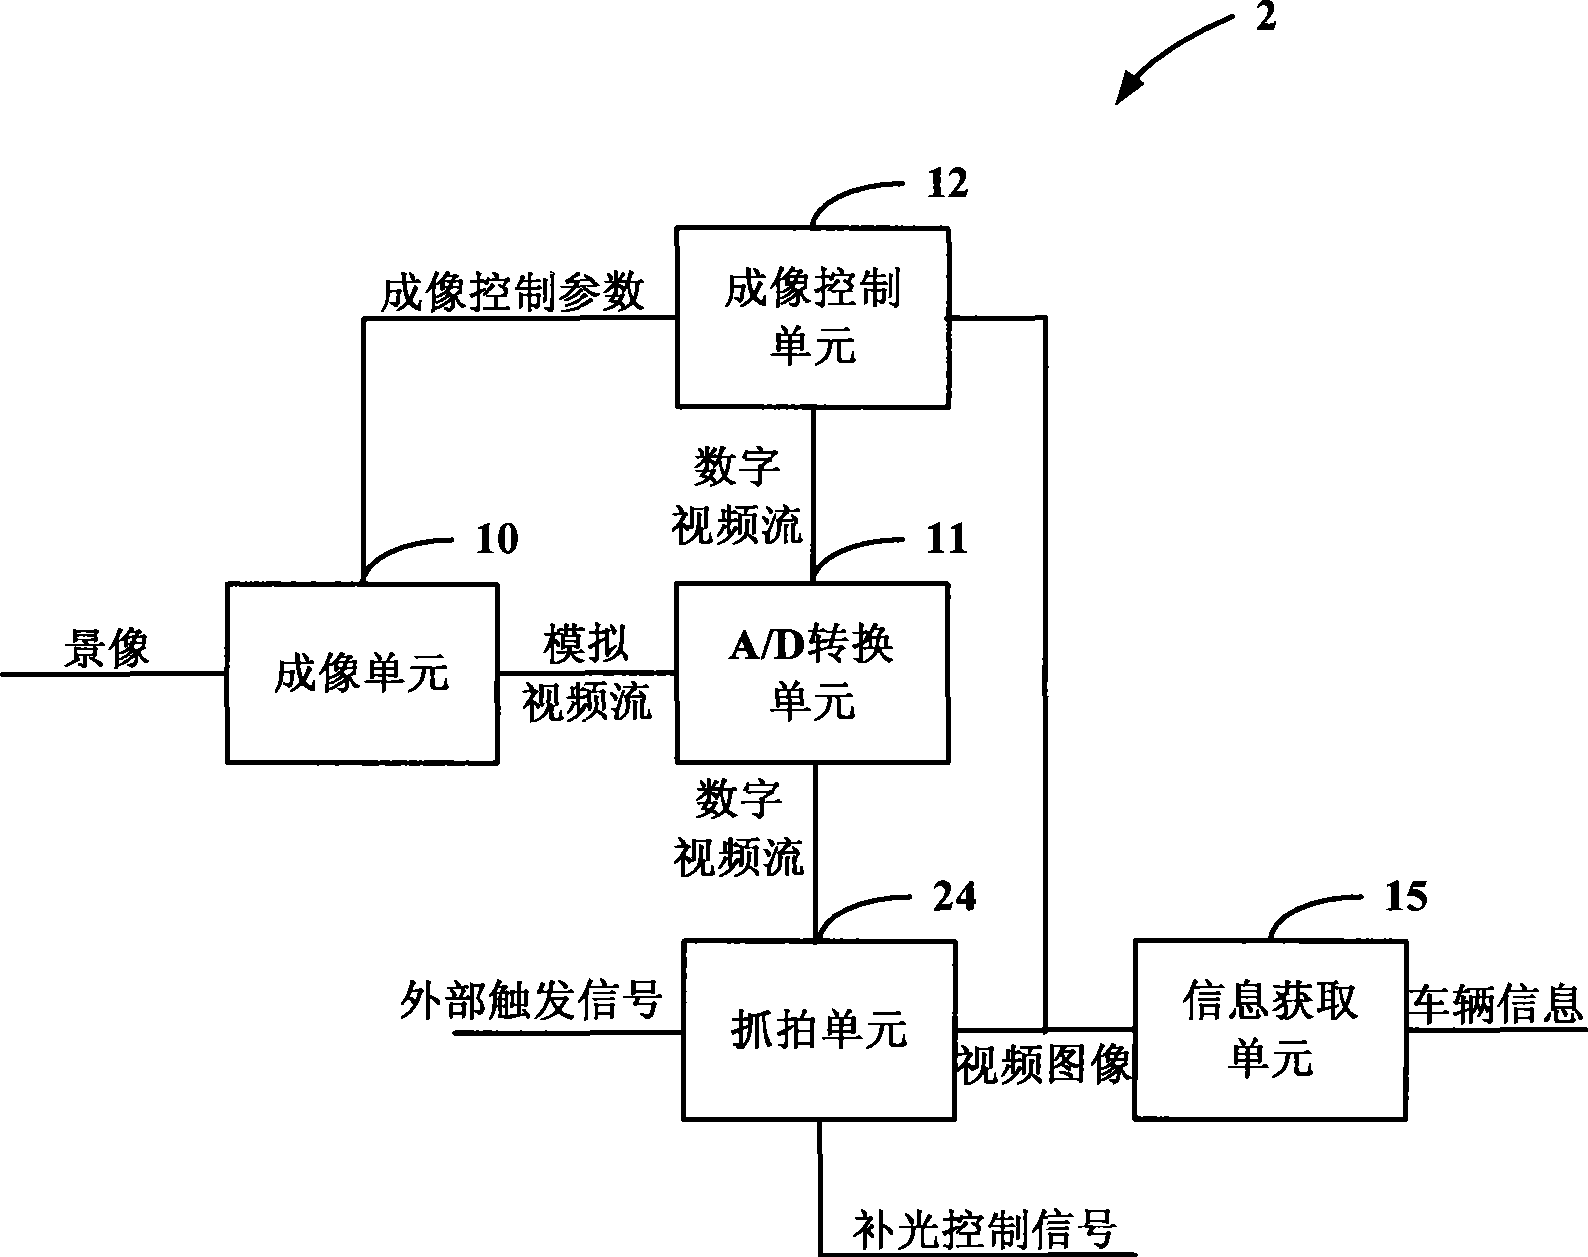 Image acquisition and treatment apparatus and method, and vehicle monitoring and recording system